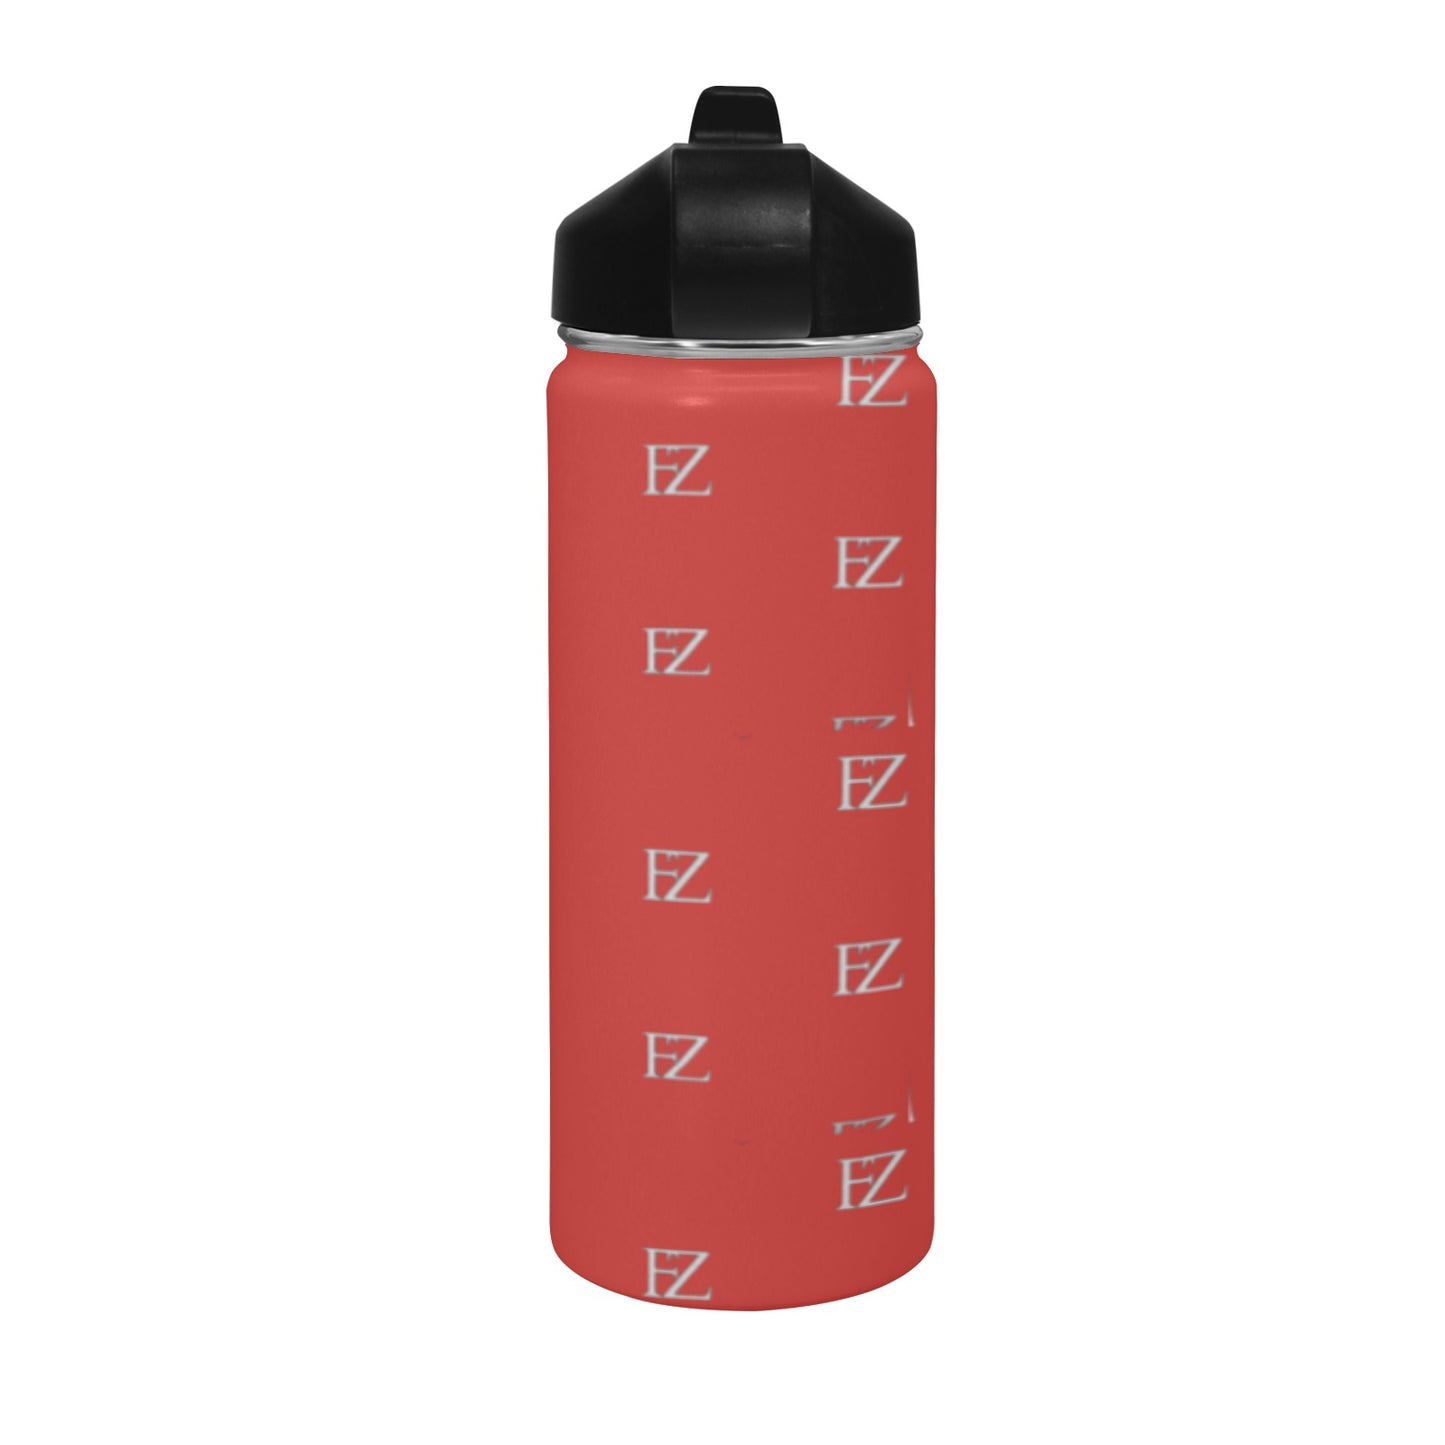 FZ Original Insulated With Straw Lid Water Bottle